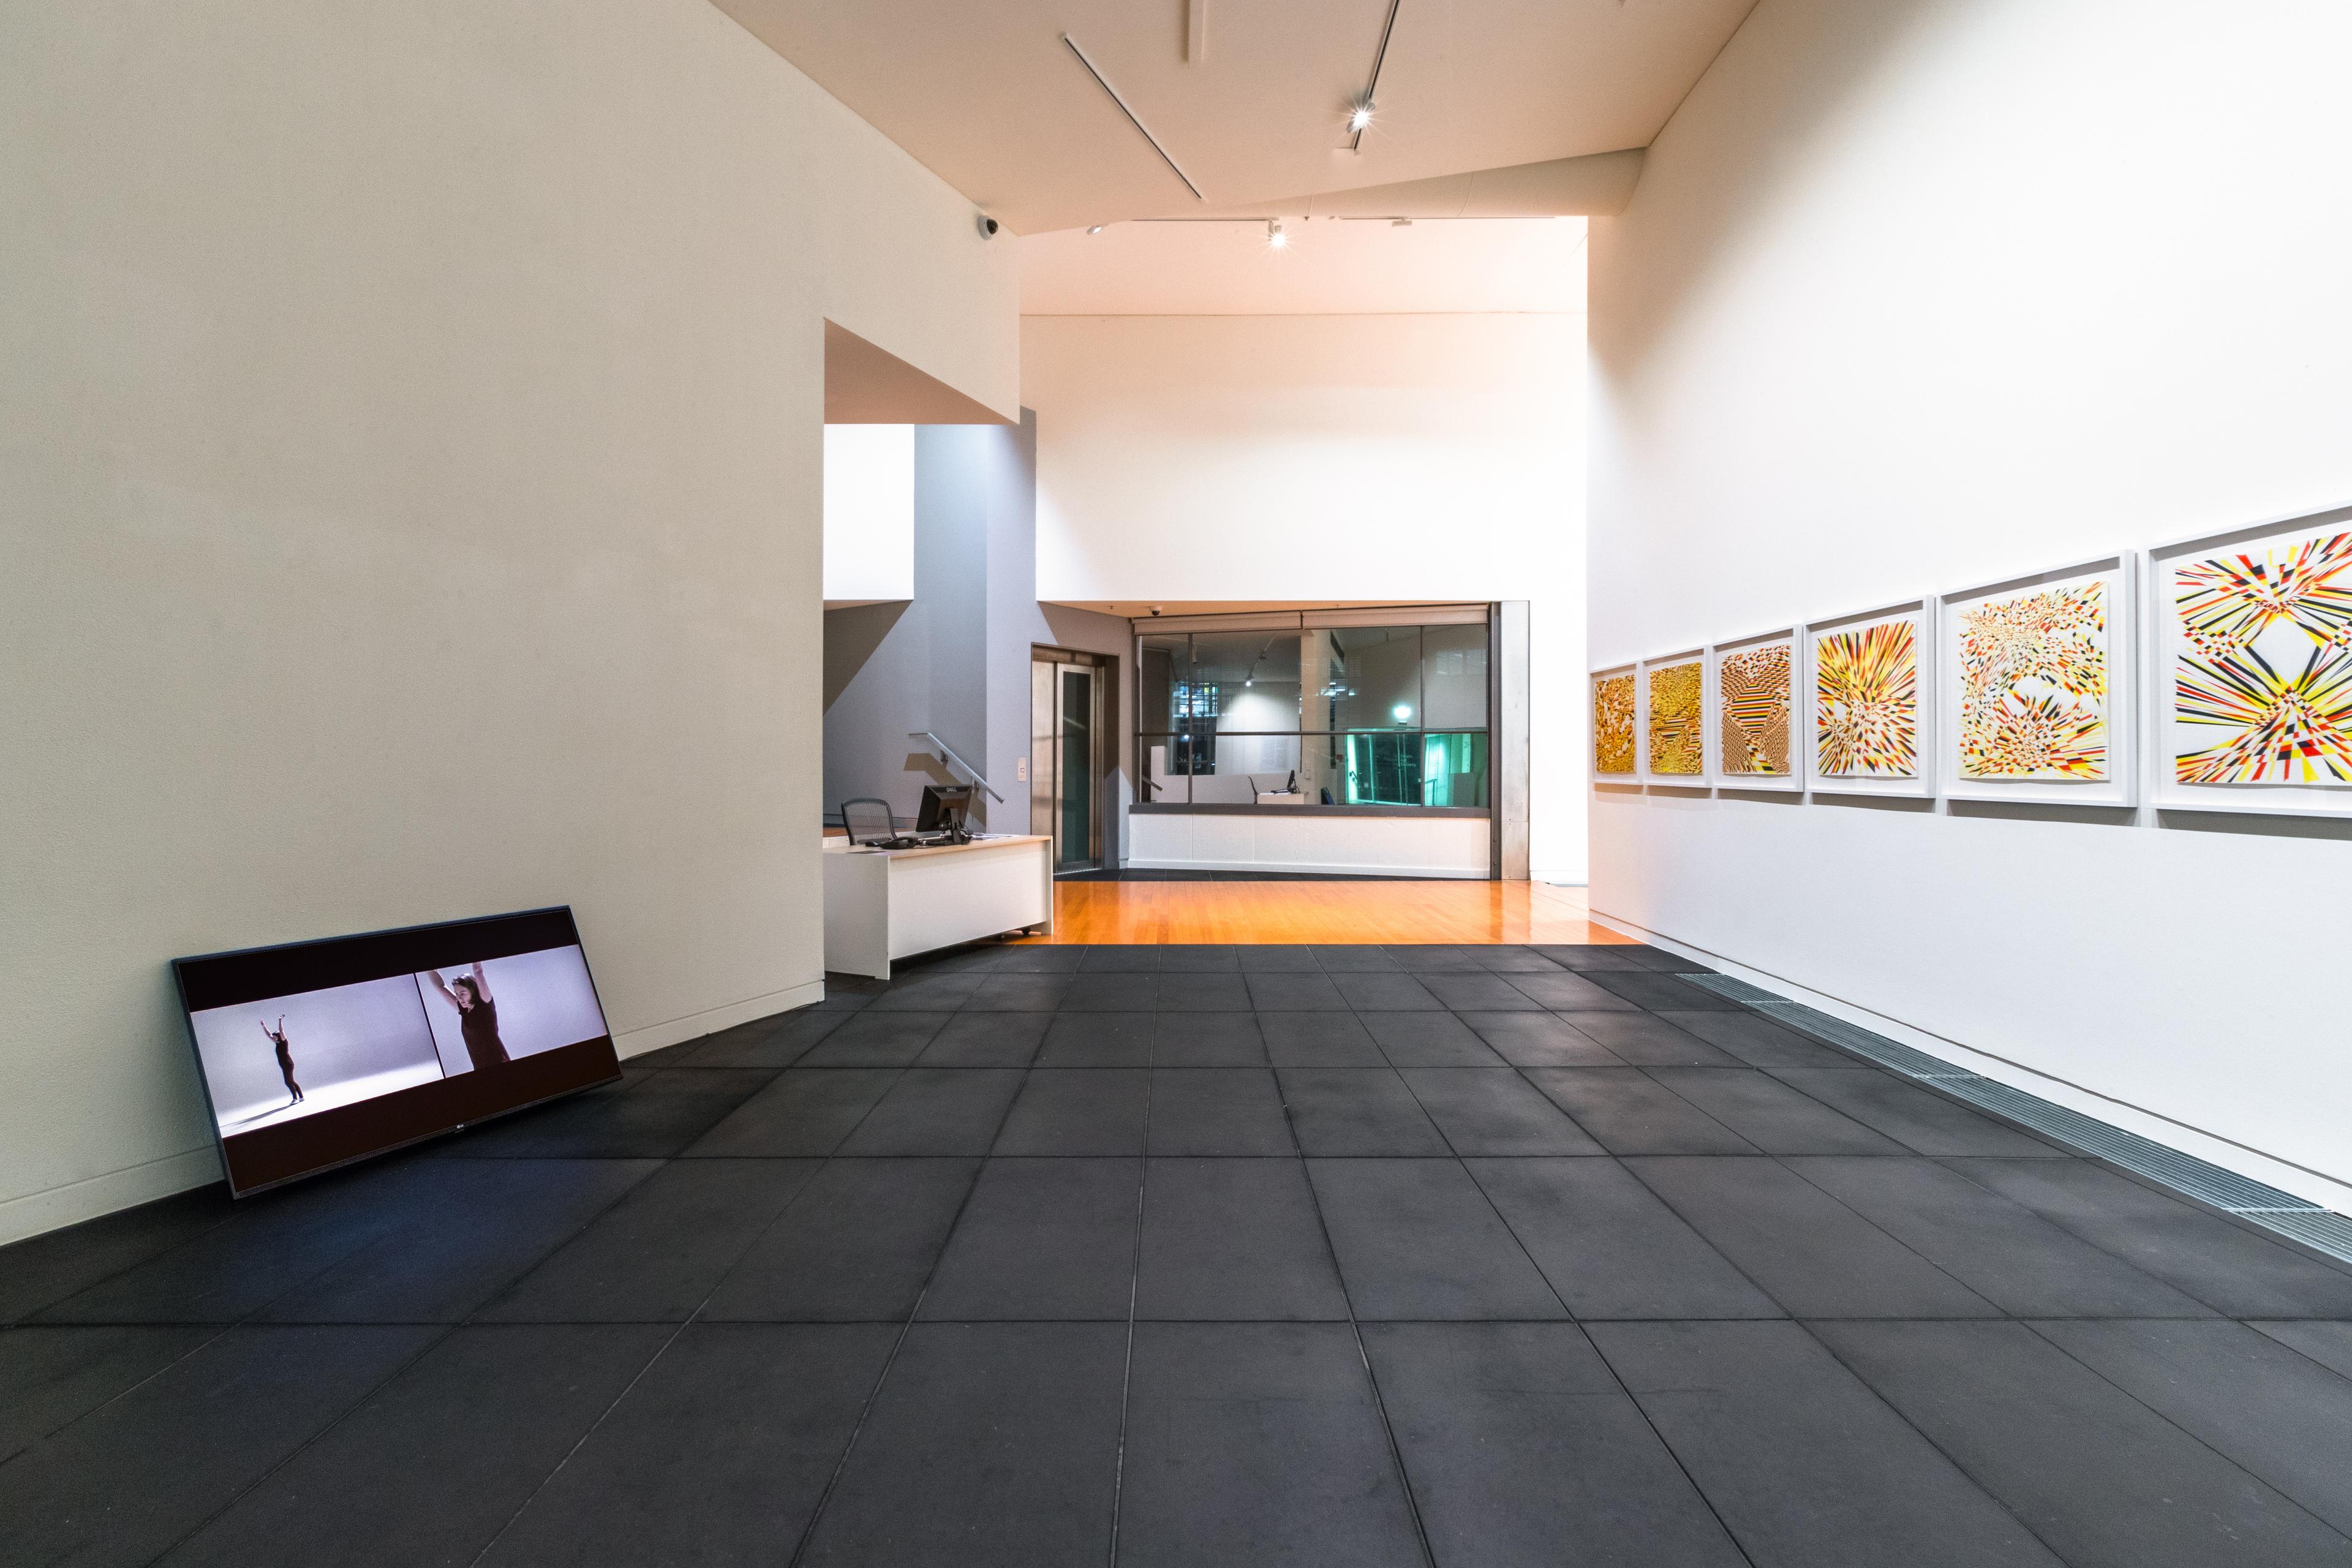 Installation view of Energy Work: Kathy Barry , Te Pātaka Toi Adam Art Gallery, Wellington, 13 July – 25 September 2022. Photo by Ted Whitaker.